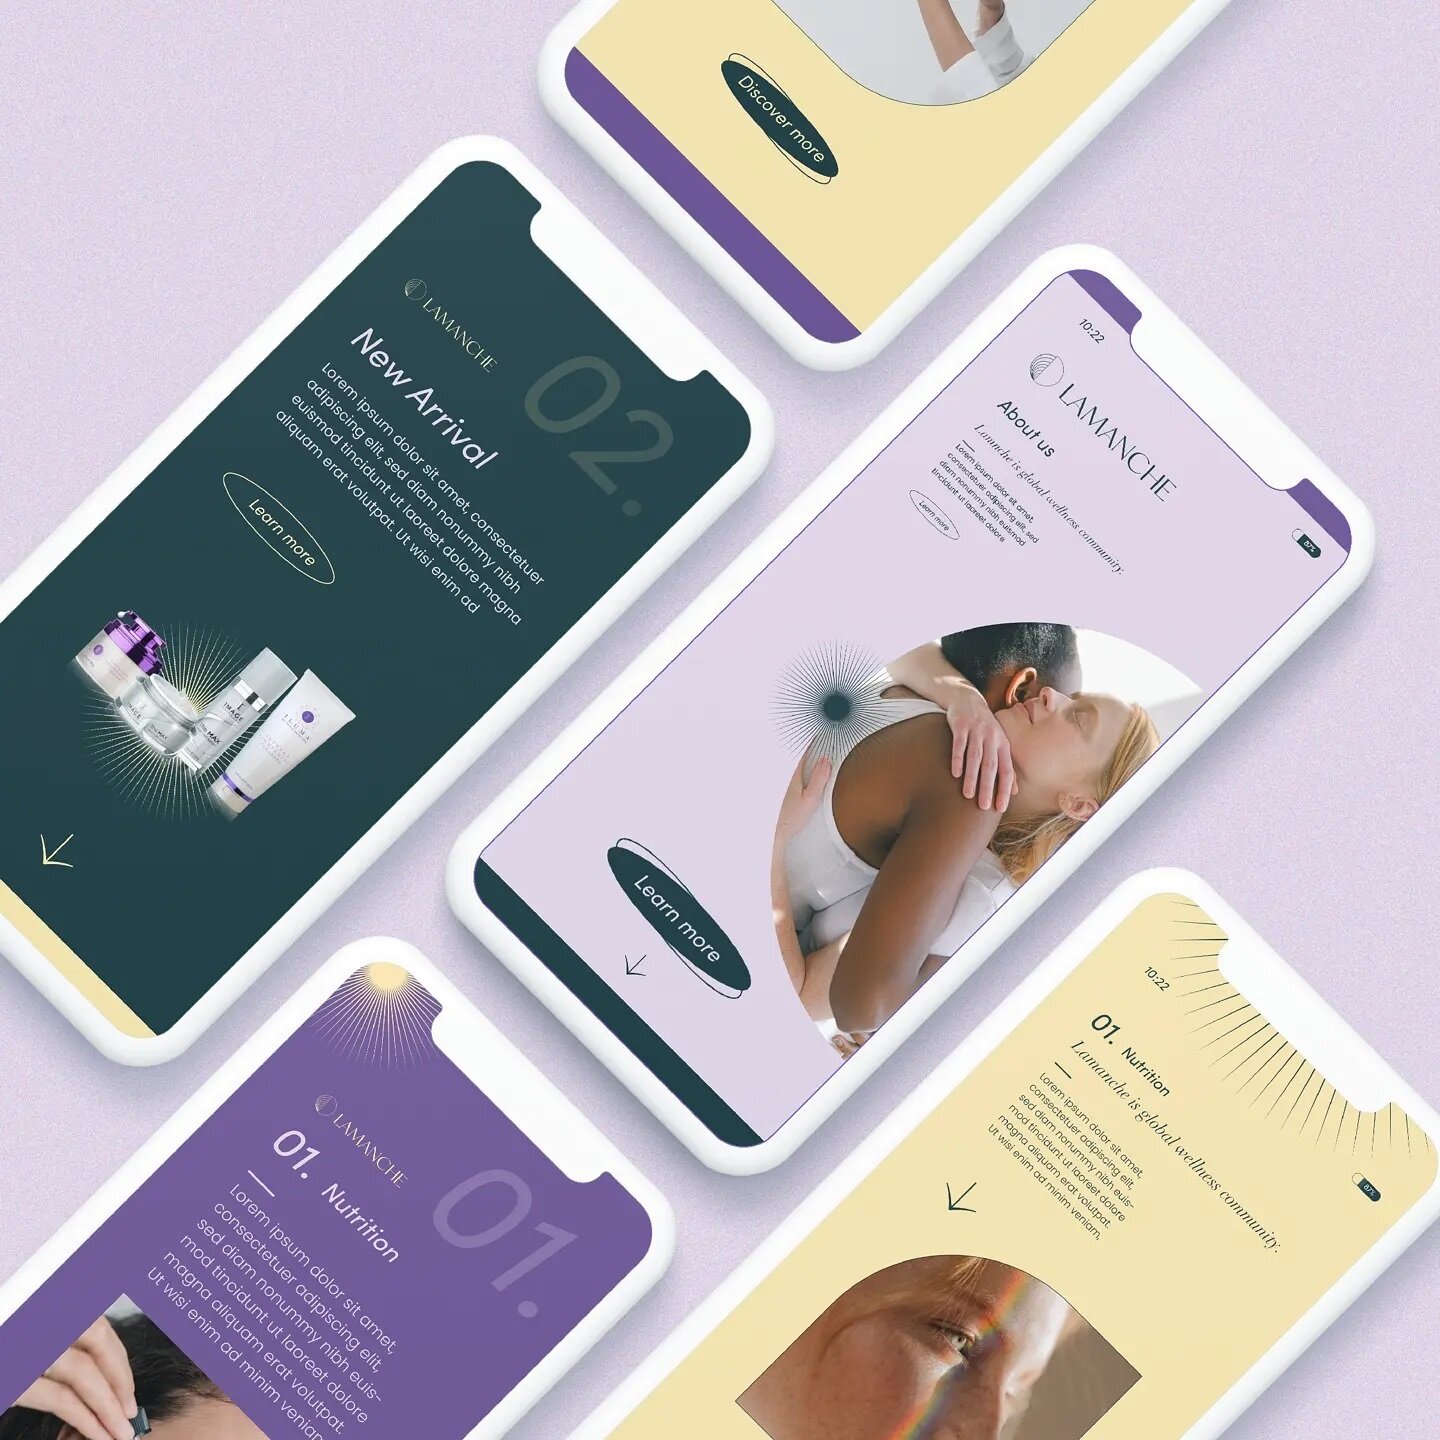 💜Lamanche - Brand Identity💜
Part III. 

👉Lamanche is a global wellness community dedicated to integrative medicine, nutrition, nontoxic cosmetology, and meaningful relationships. 
🤗Their goal is to enlighten people, helping them feel and look bet